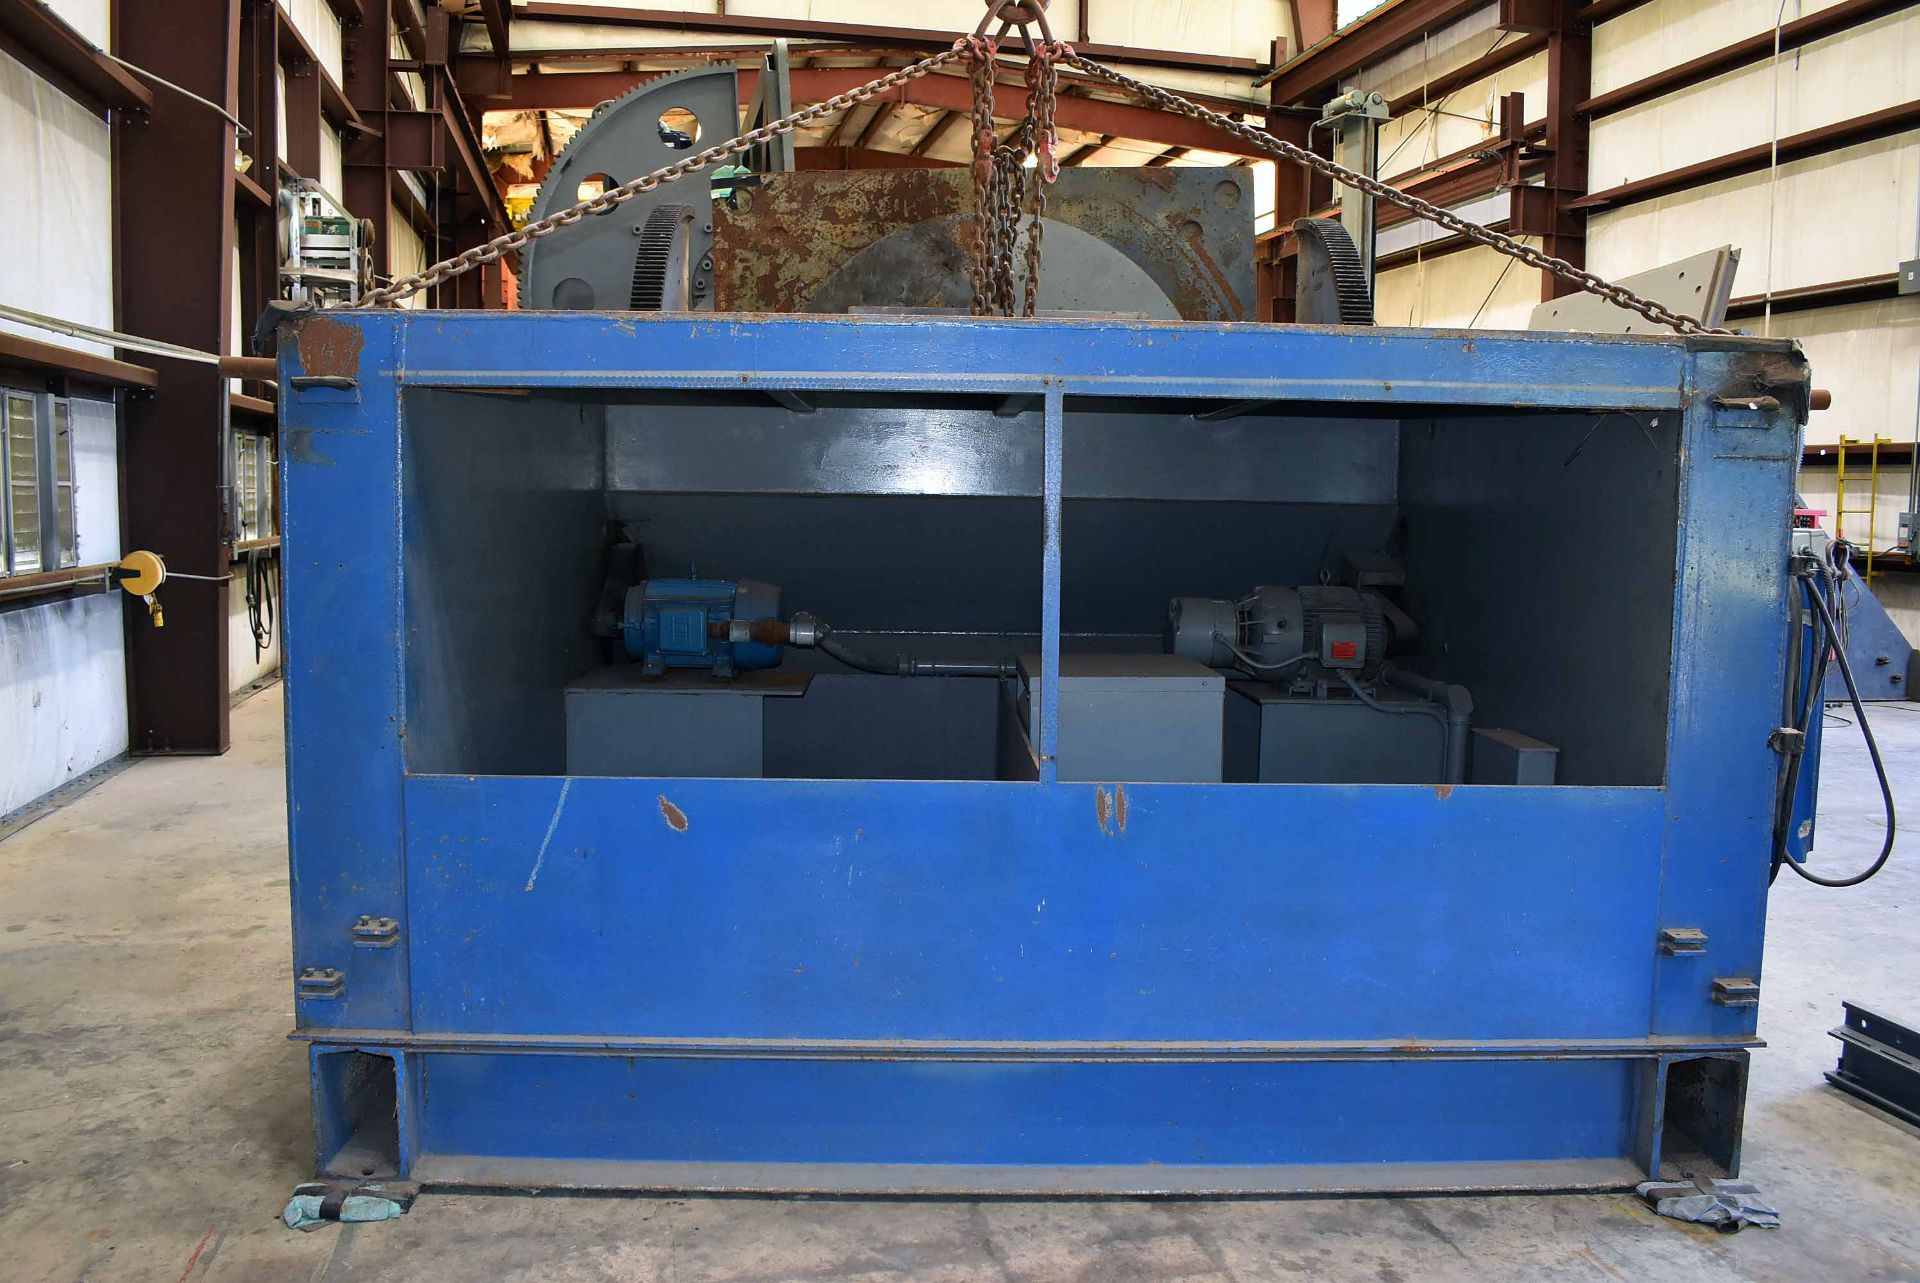 LARGE CAPACITY WELDING POSITIONER, KOIKE ARONSON 95,000 LB. CAP., Mdl. AB-950-96, 96" X 96" square - Image 8 of 11